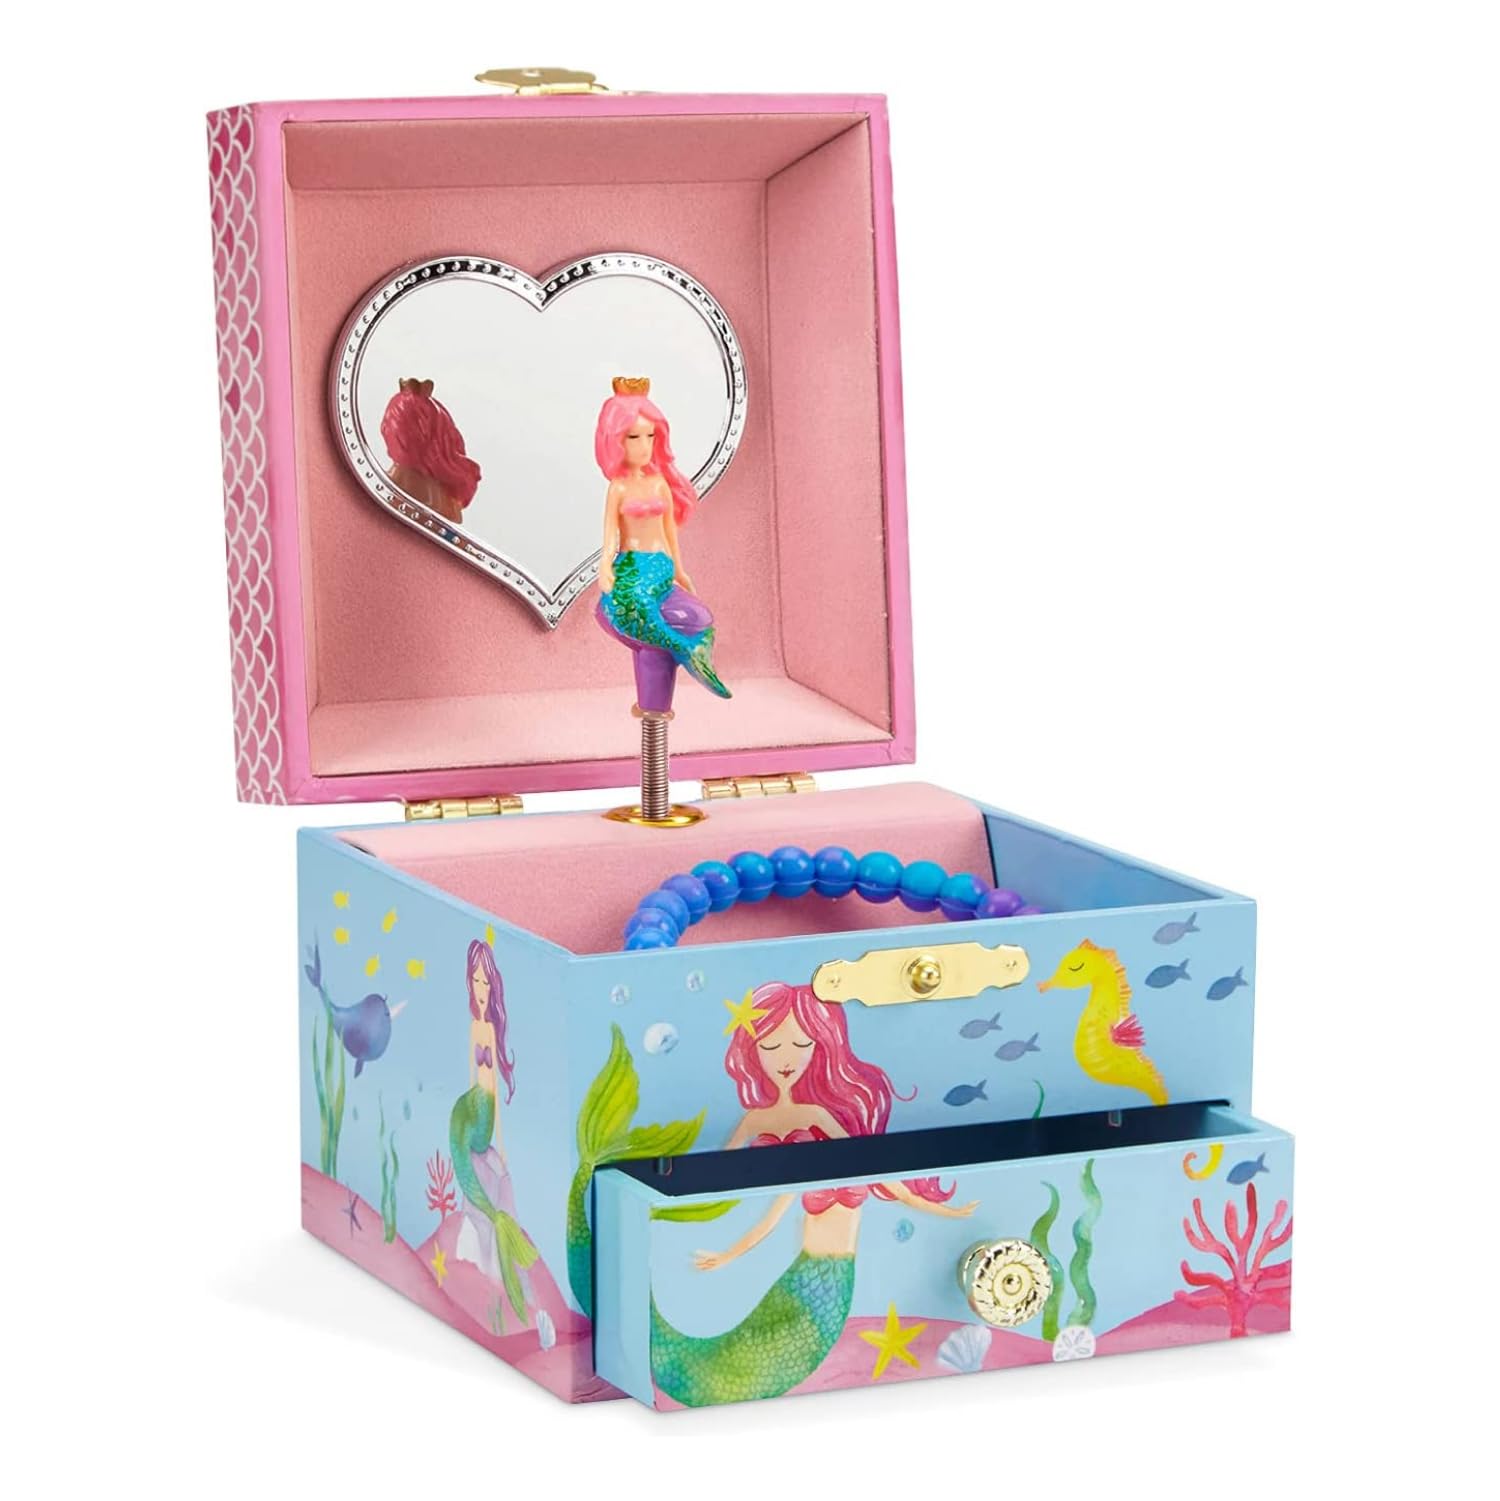 Jewelkeeper Mermaid girls Musical Jewelry Box, Underwater Design Pullout Drawer, Over The Waves Tune